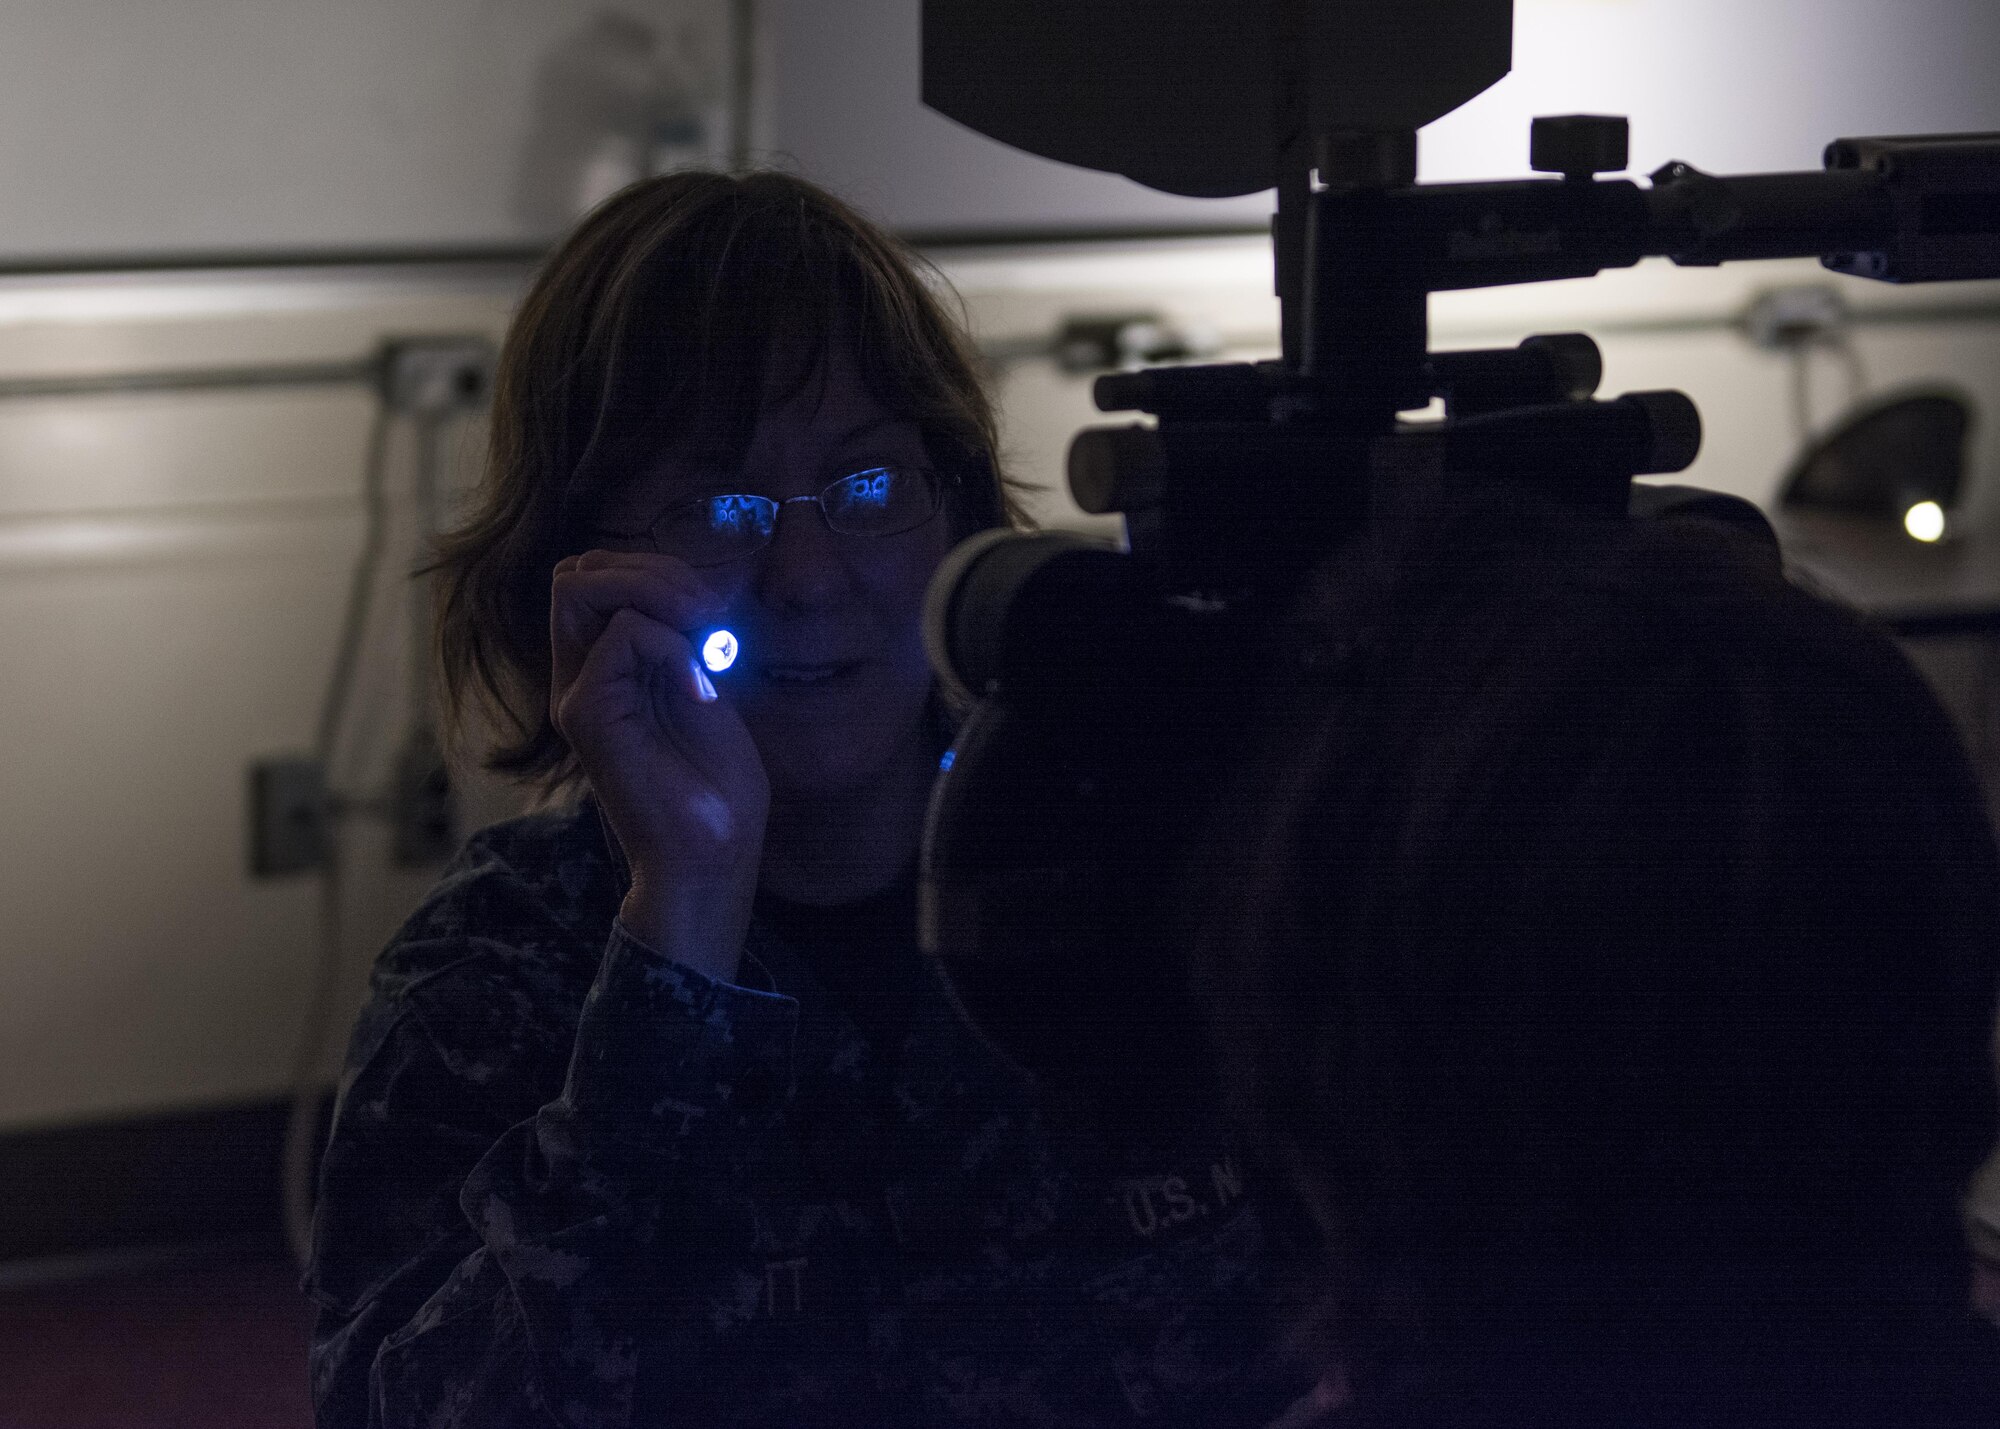 Navy Cmdr. Bonnie Garbutt, an optometrist assigned to Naval Hospital Camp Pendleton, Camp Pendleton, Calif., calibrates a phoropter which will be used to give eye exams at Swain County High School during Smoky Mountain Medical Innovative Readiness Training in Bryson City, N.C., on Aug. 3, 2017.